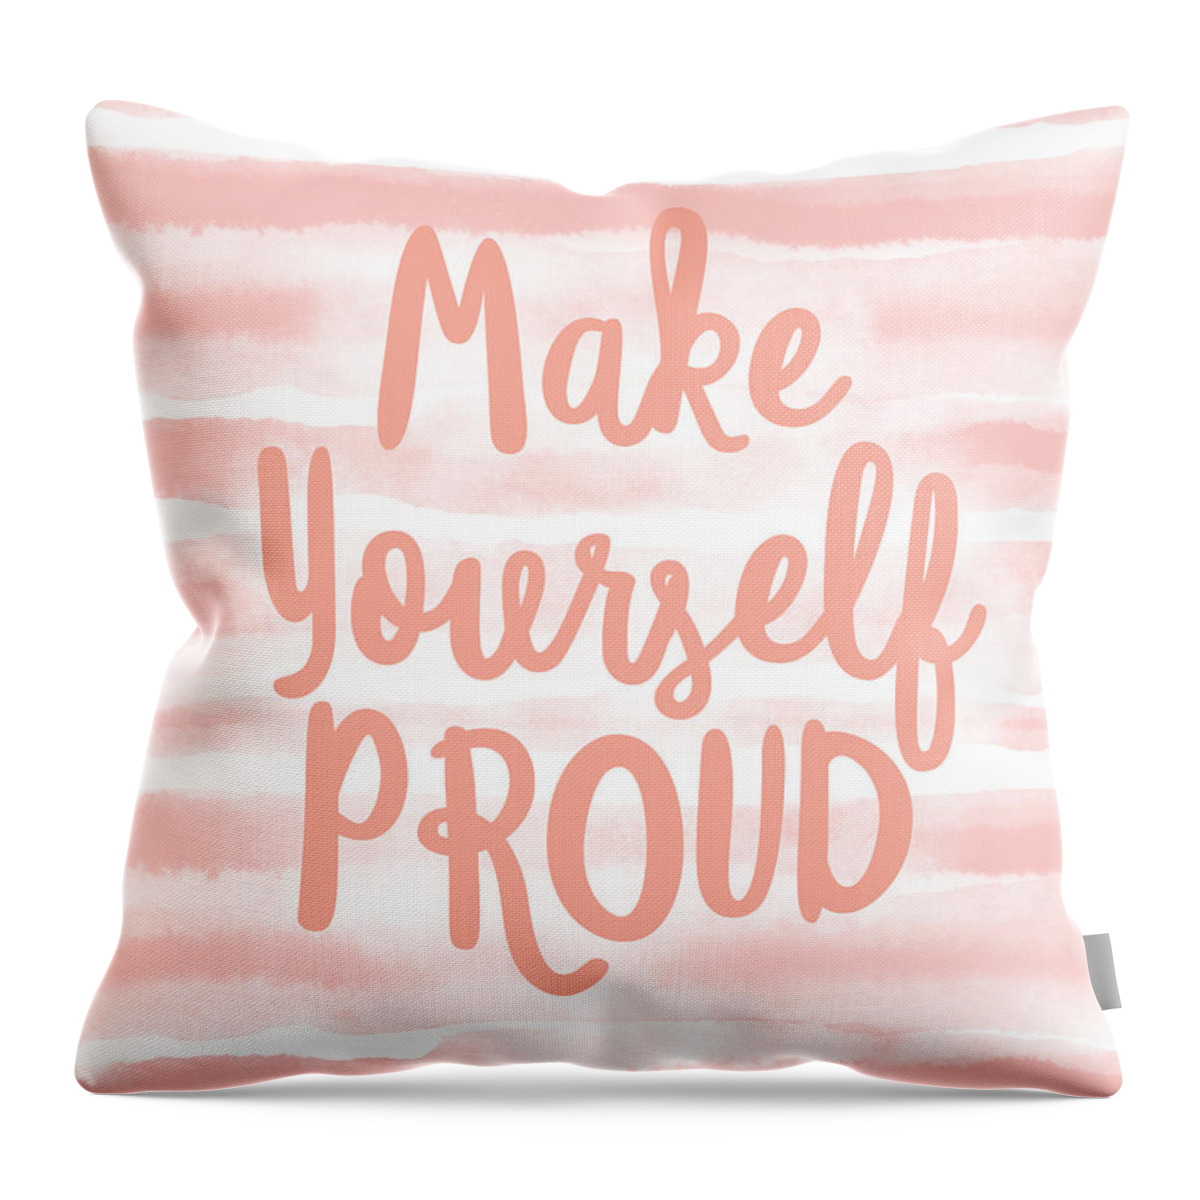 Motivational Throw Pillow featuring the mixed media Make Yourself Proud -Art by Linda Woods by Linda Woods